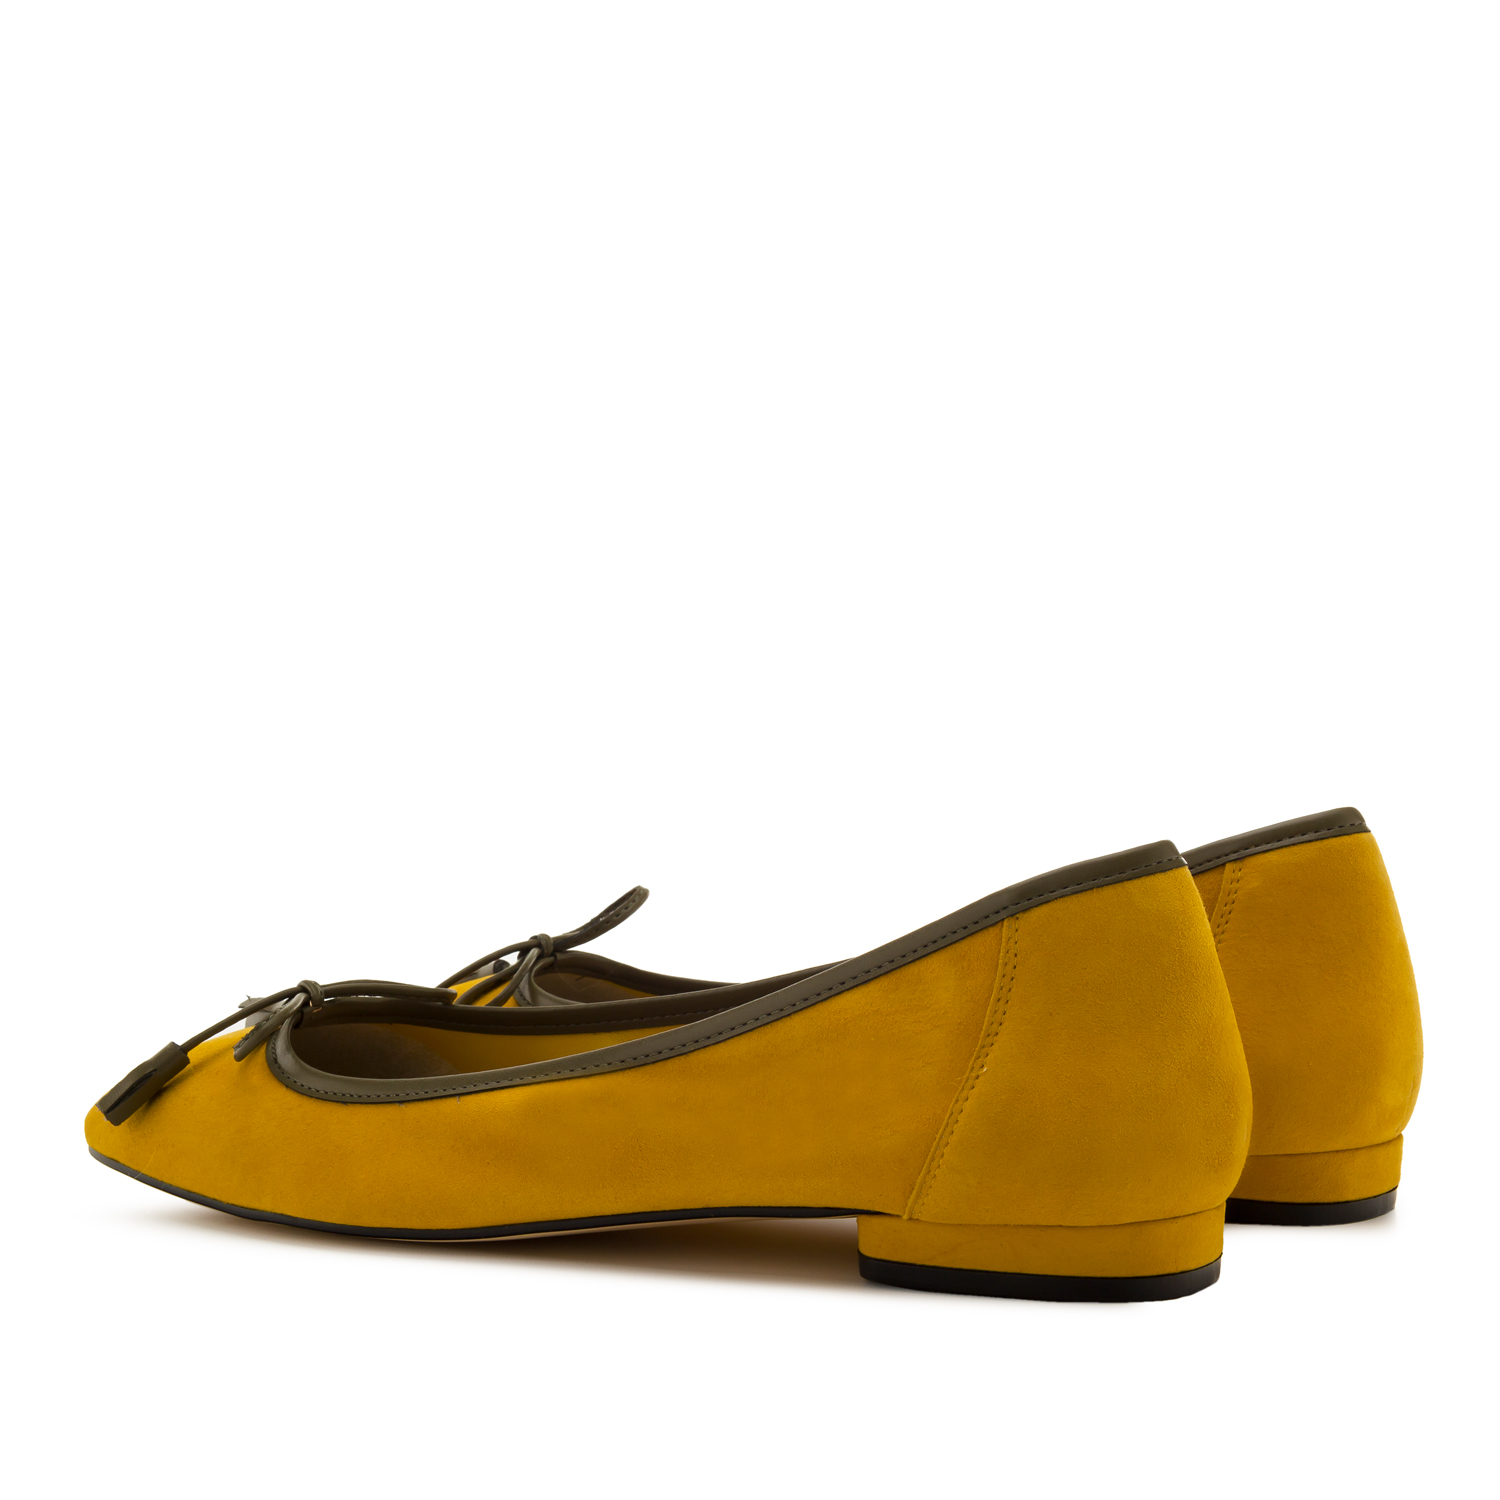 Bow Ballet Flats in Mustard Suede Leather 